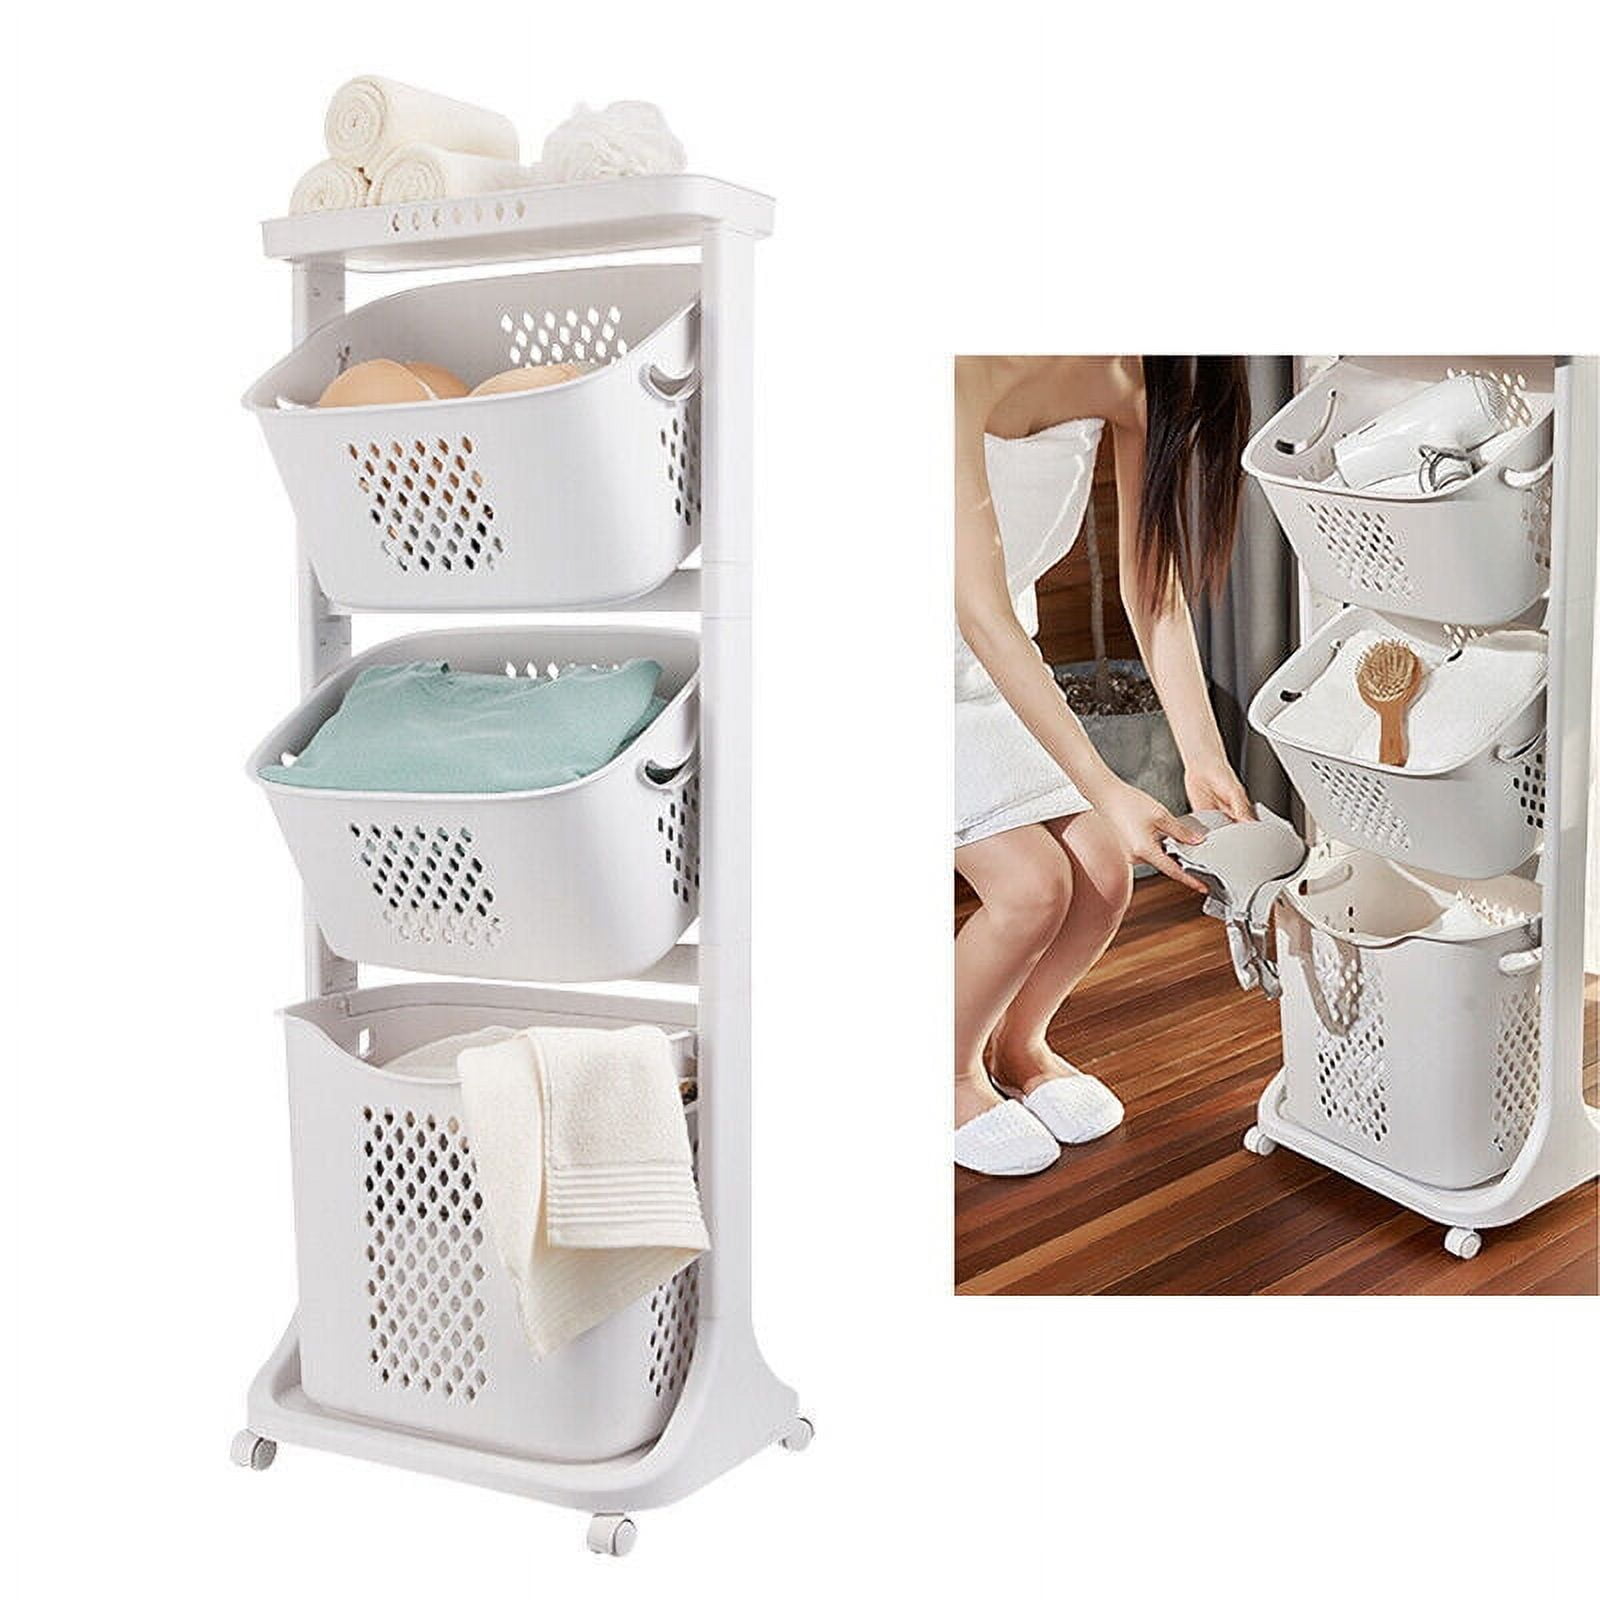 Portable Laundry Hamper with Sorter for Home, and Bathroom Storage Basket  Only د.ب.‏ 3.50 بات بات Mobile